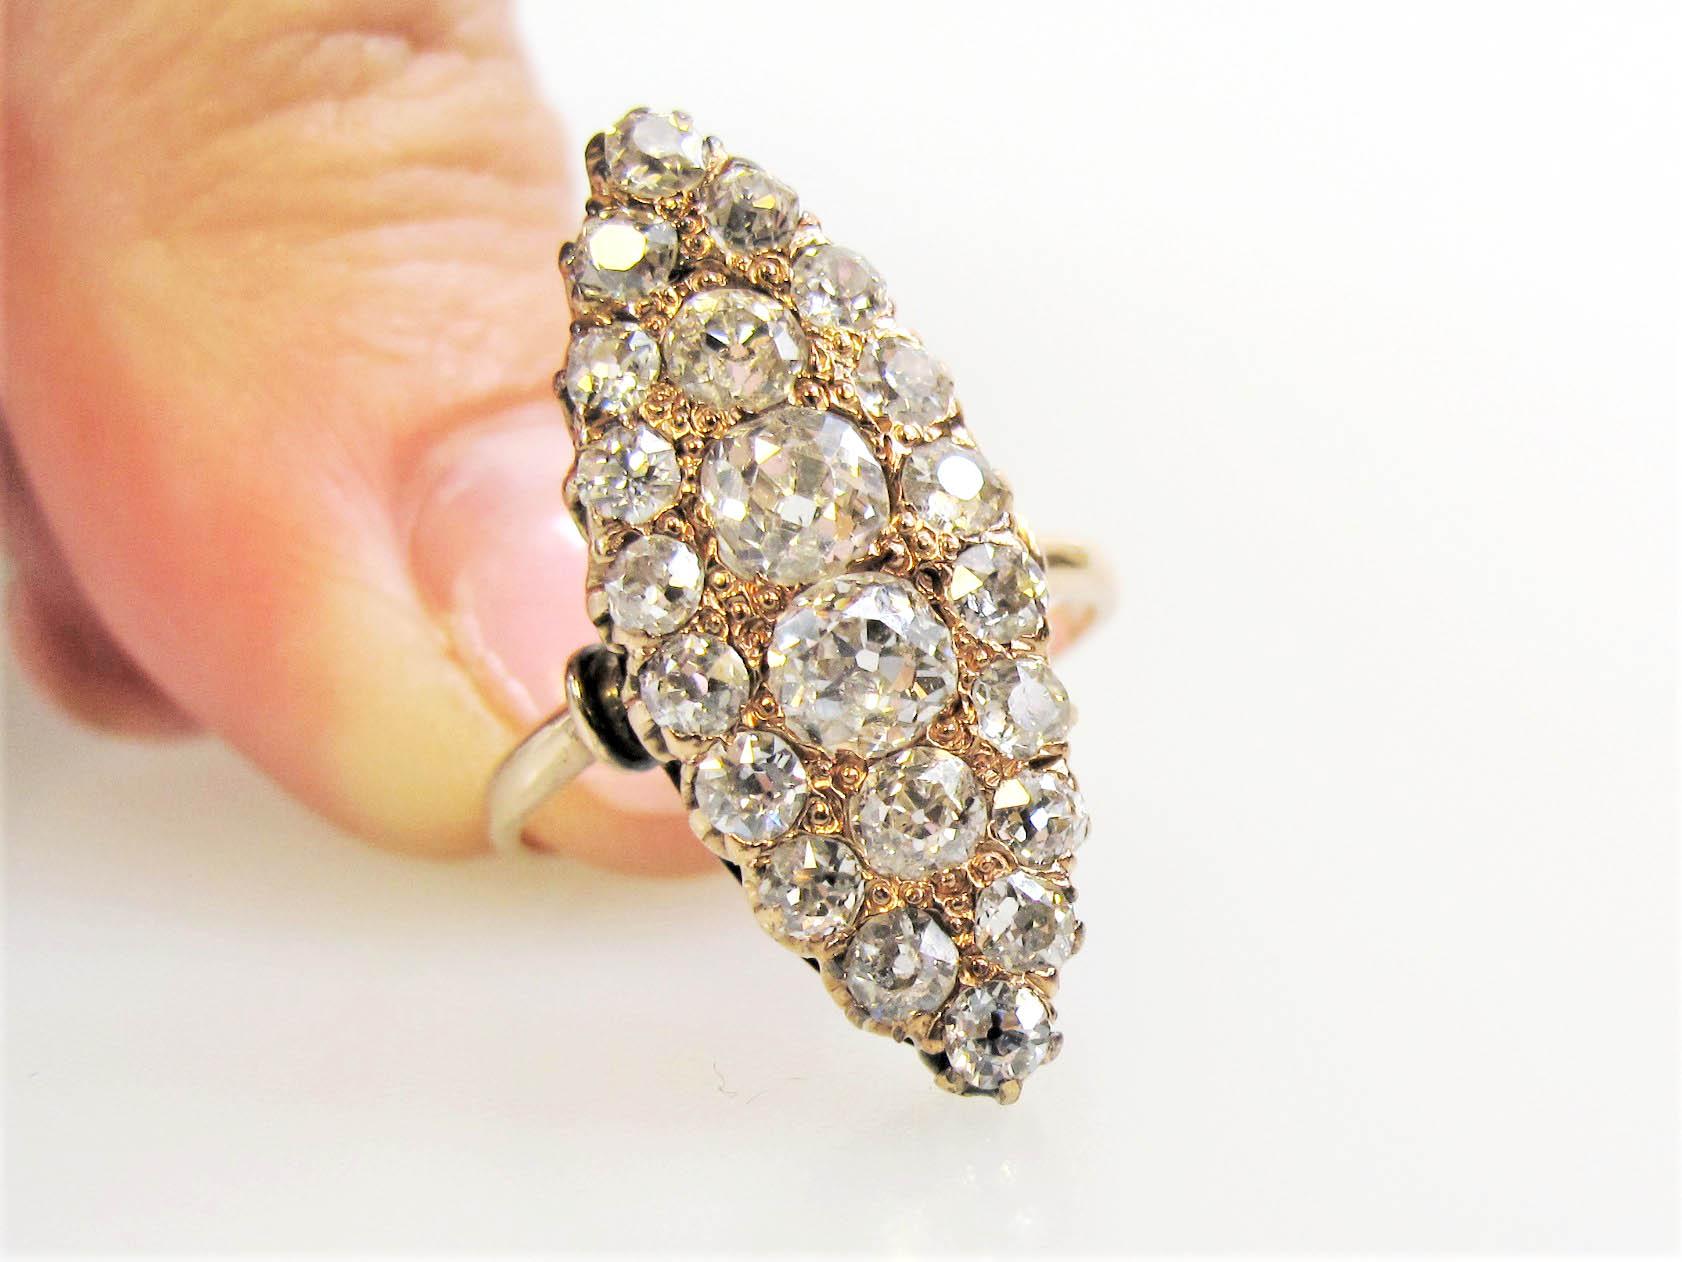 Ring size: 5.5

This stunning marquis shaped vintage diamond ring is the essence of old world elegance. The delicate rose gold shank paired with the incredible Old Mine Cut stones make for a breathtaking, ultra feminine piece that you will treasure